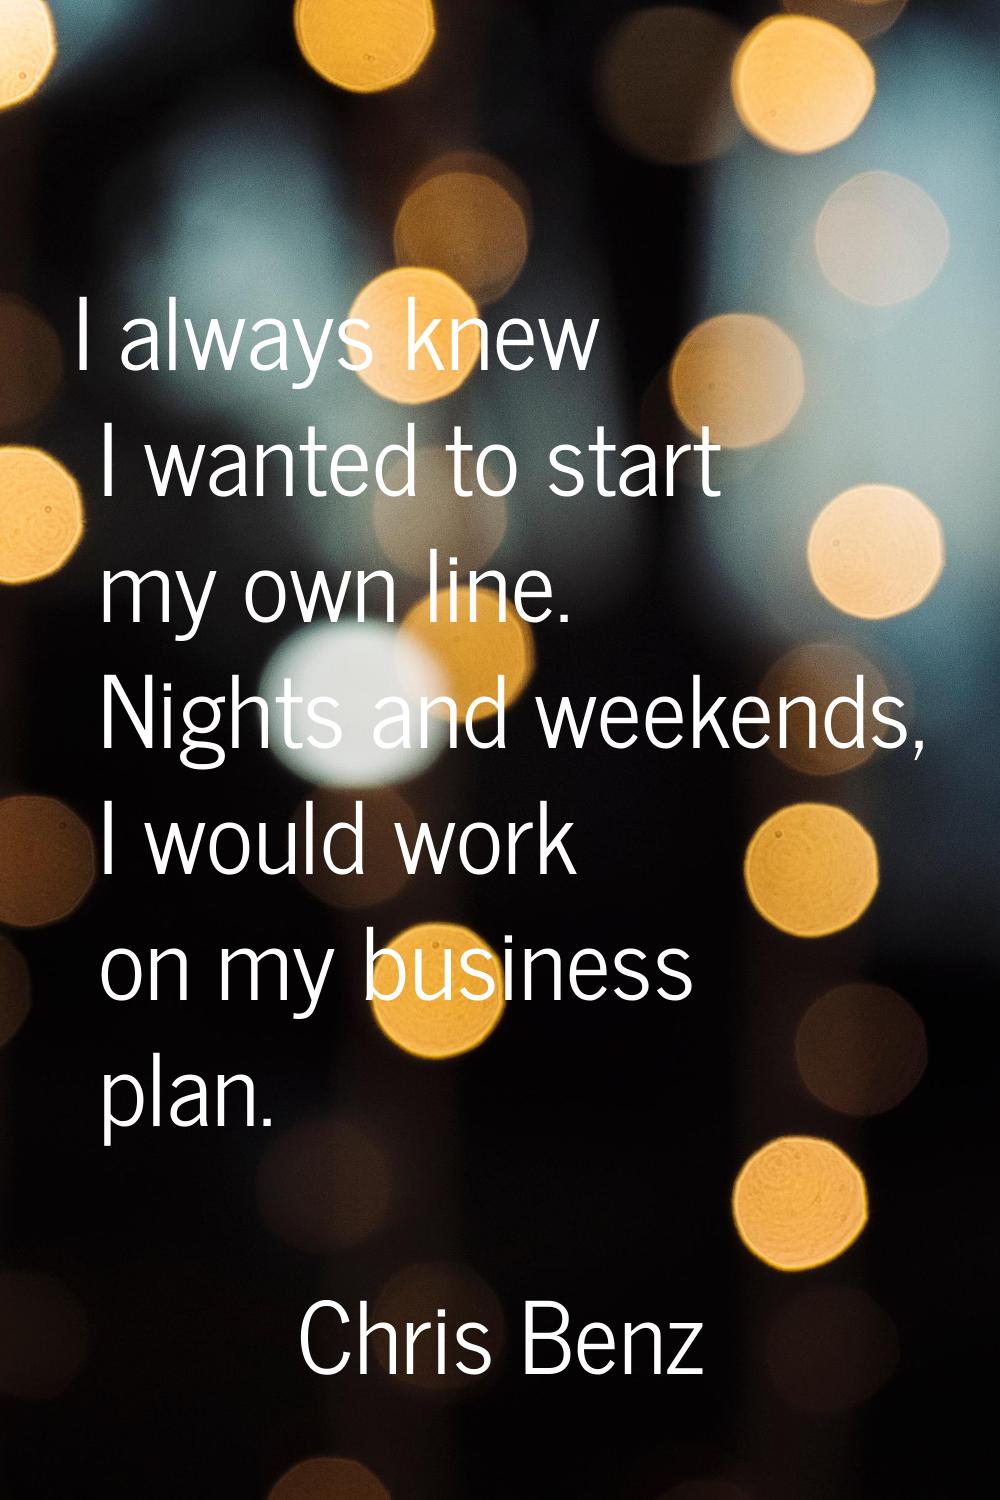 I always knew I wanted to start my own line. Nights and weekends, I would work on my business plan.